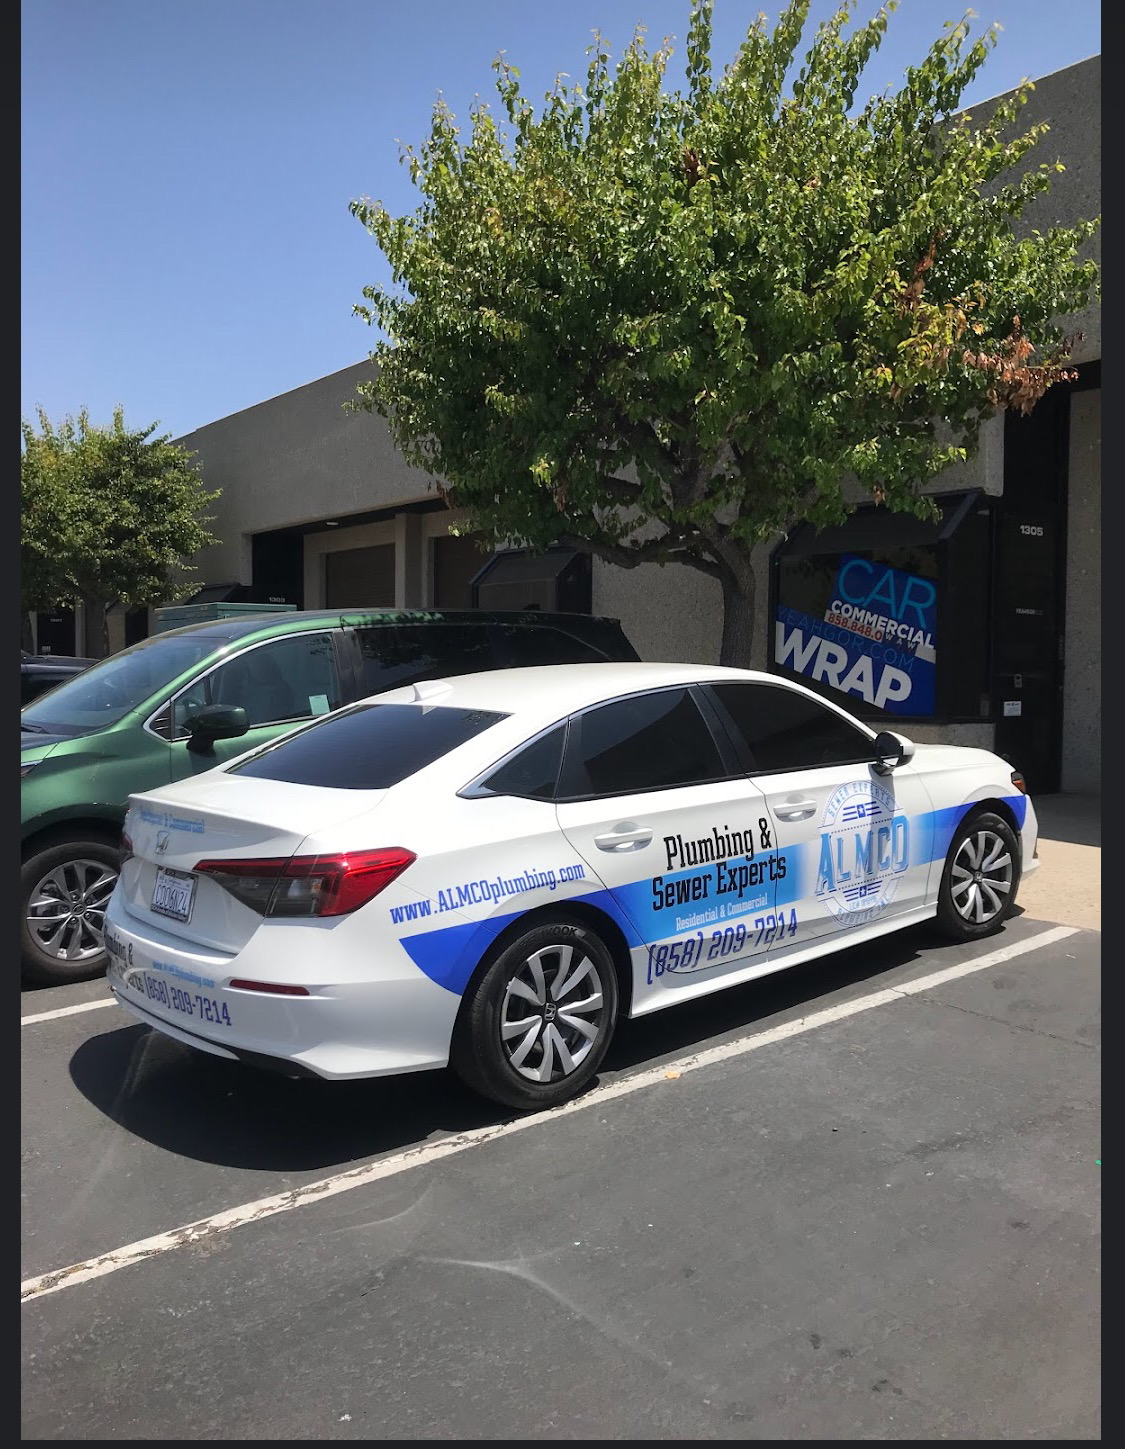 La Mesa, CA – Cars Signage and Commercial Fleet Wrap for Small Businesses.